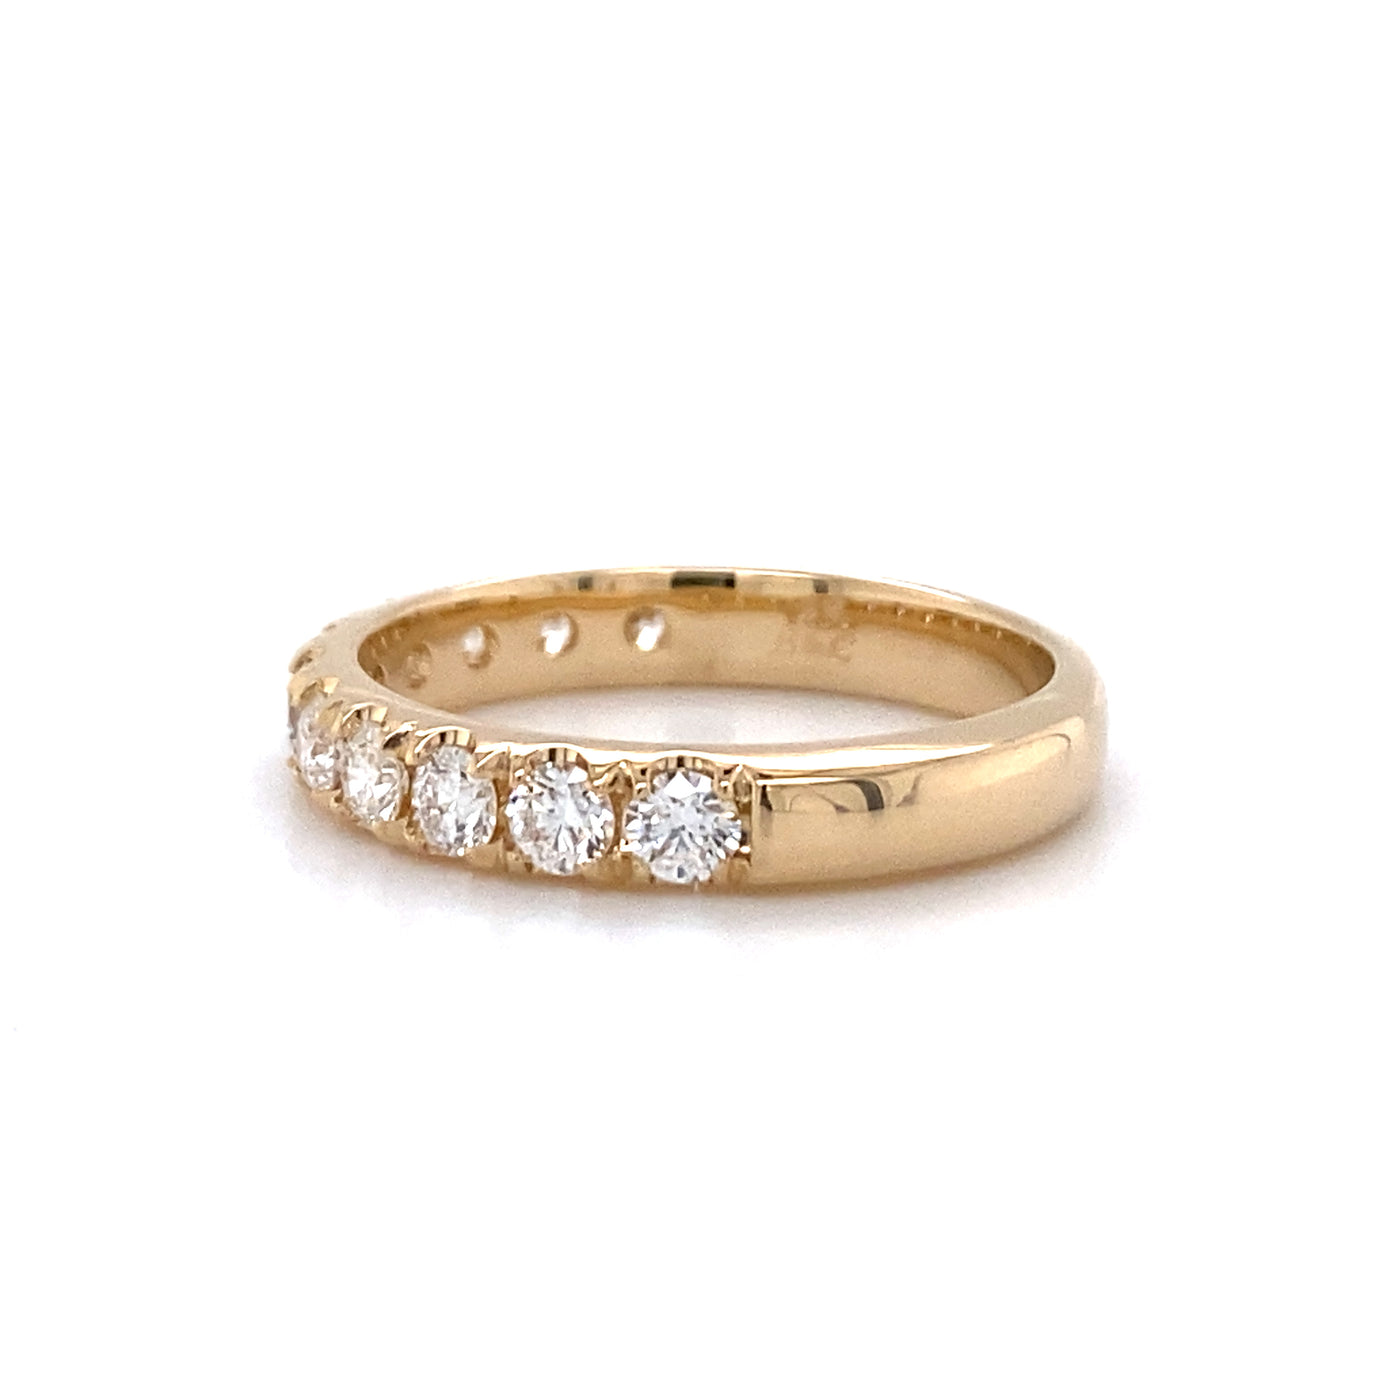 Beeghly & Co. 14 Karat Yellow Gold  Diamond Wedding Band - Lady's BCR-7-75-Y